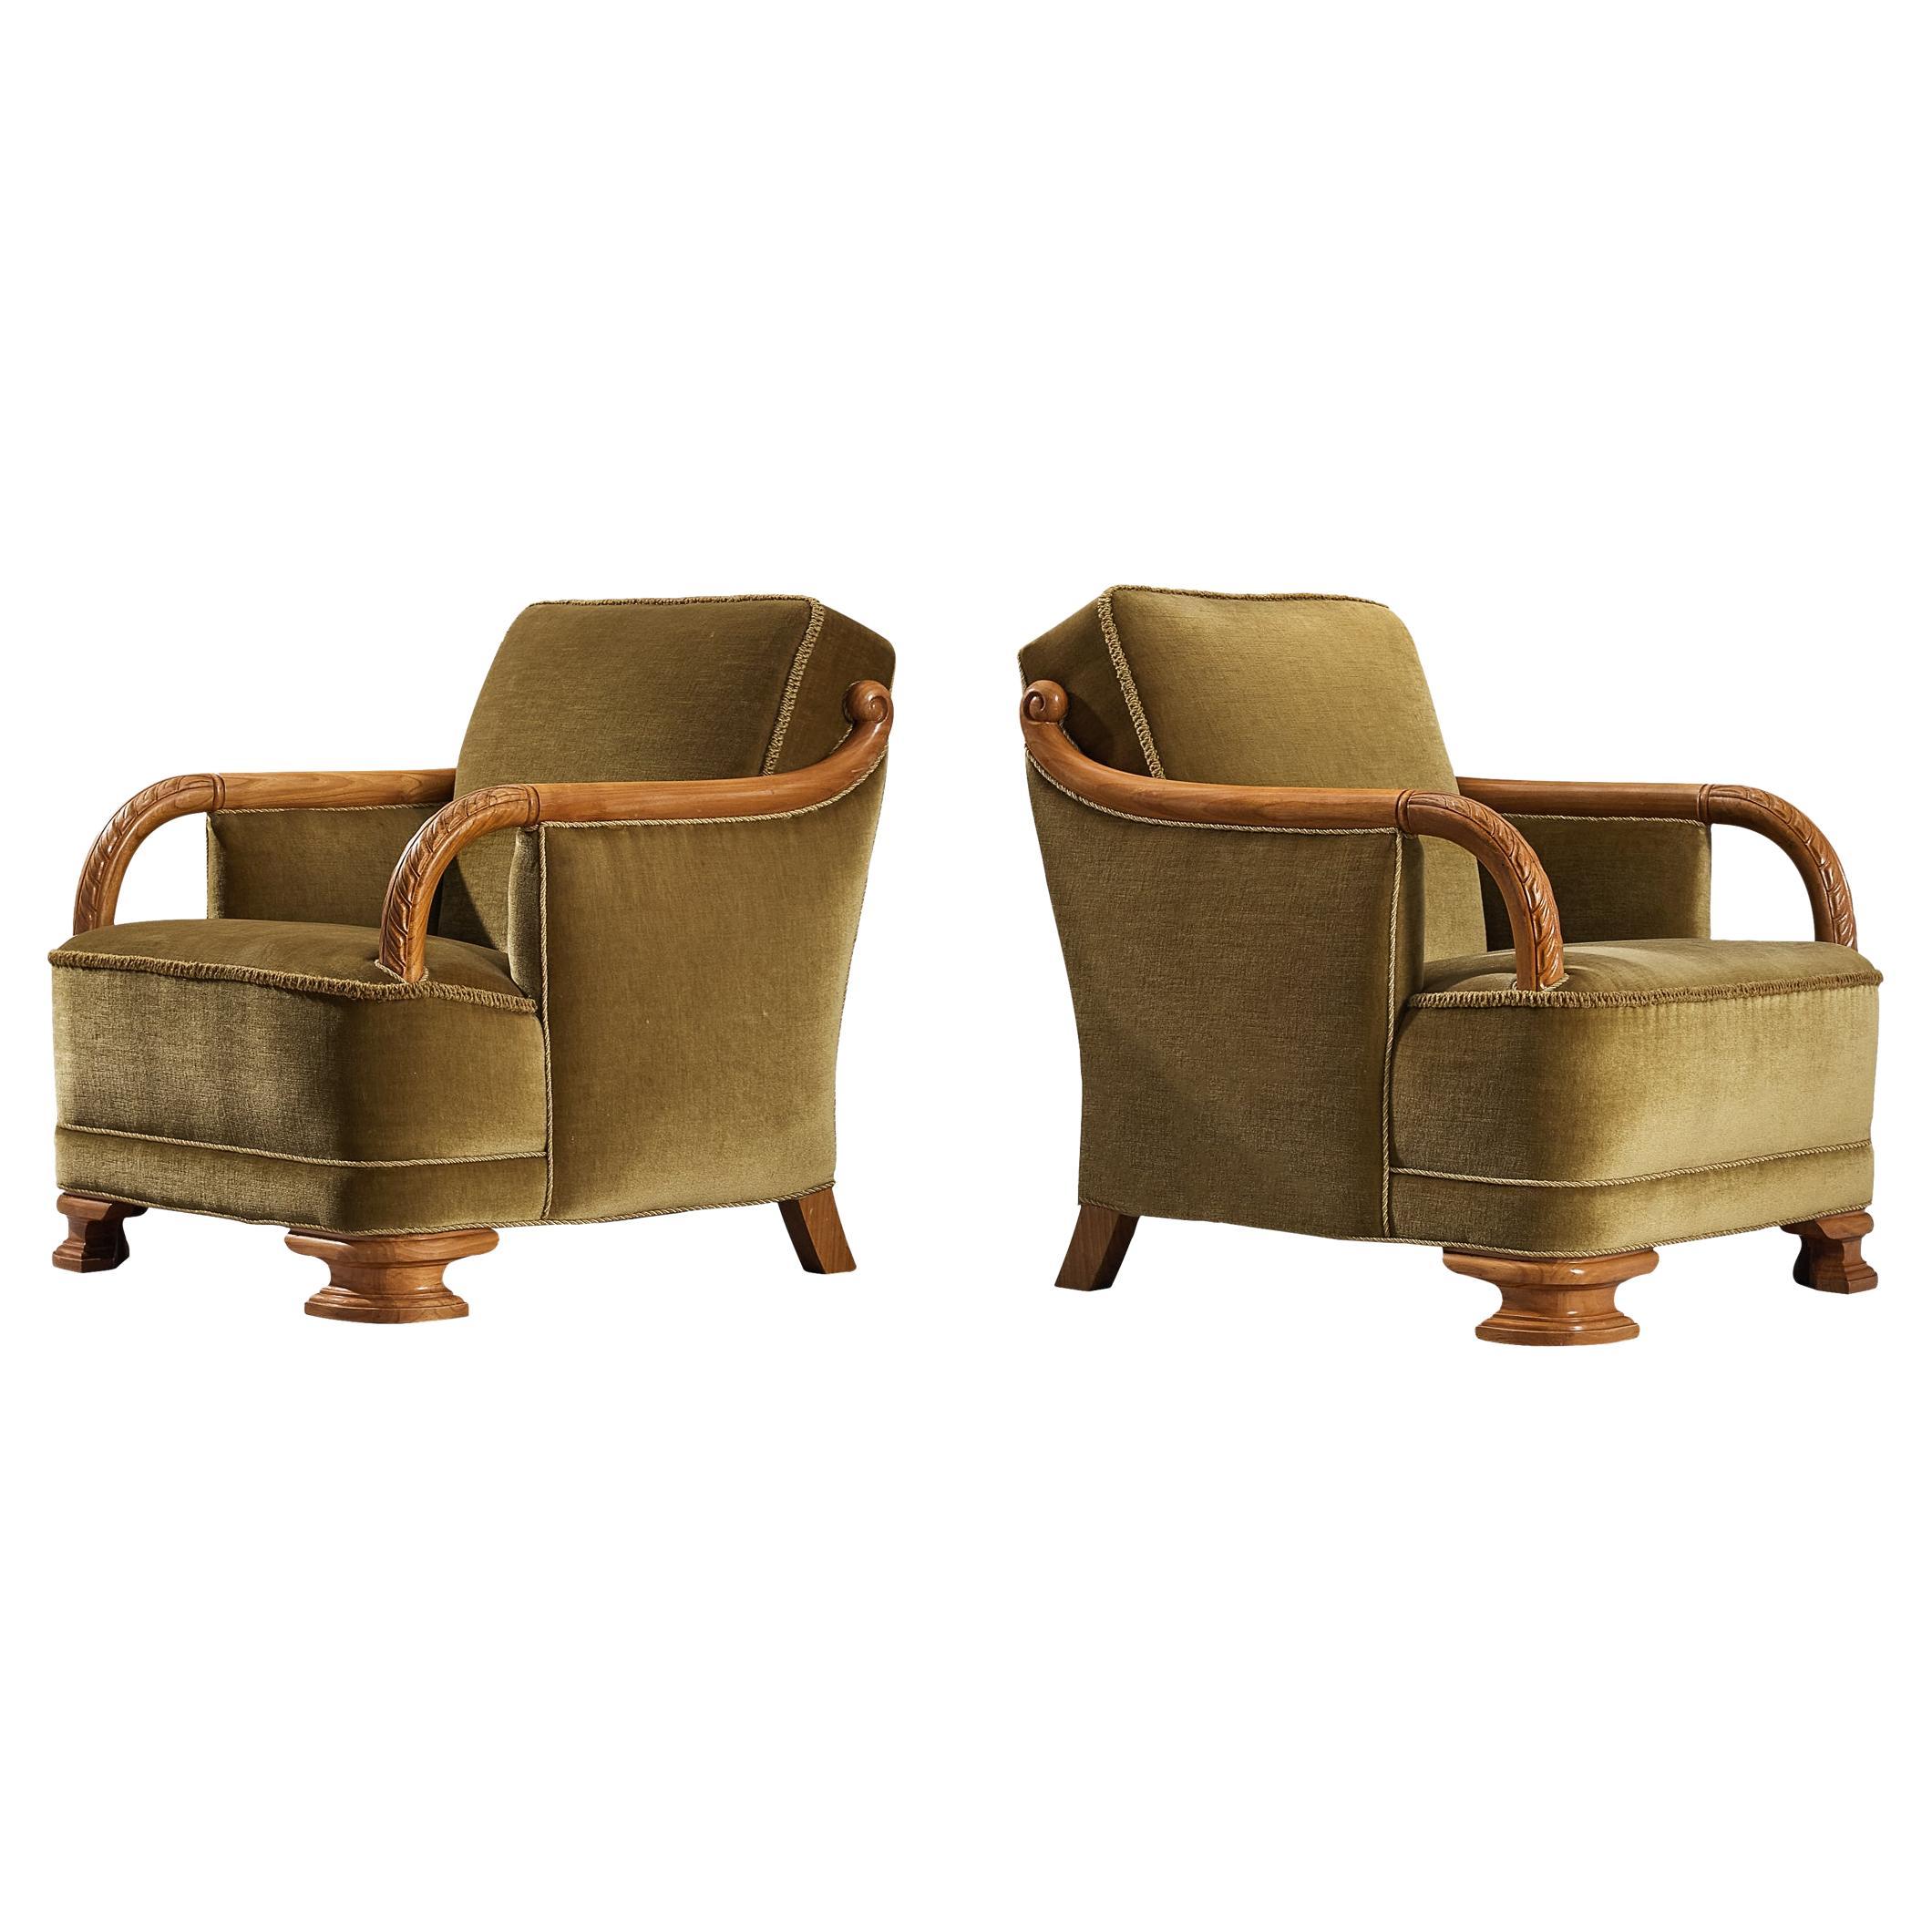 Exquisite Art Deco Pair of Danish Lounge Chairs in Olive Green Velvet and Elm